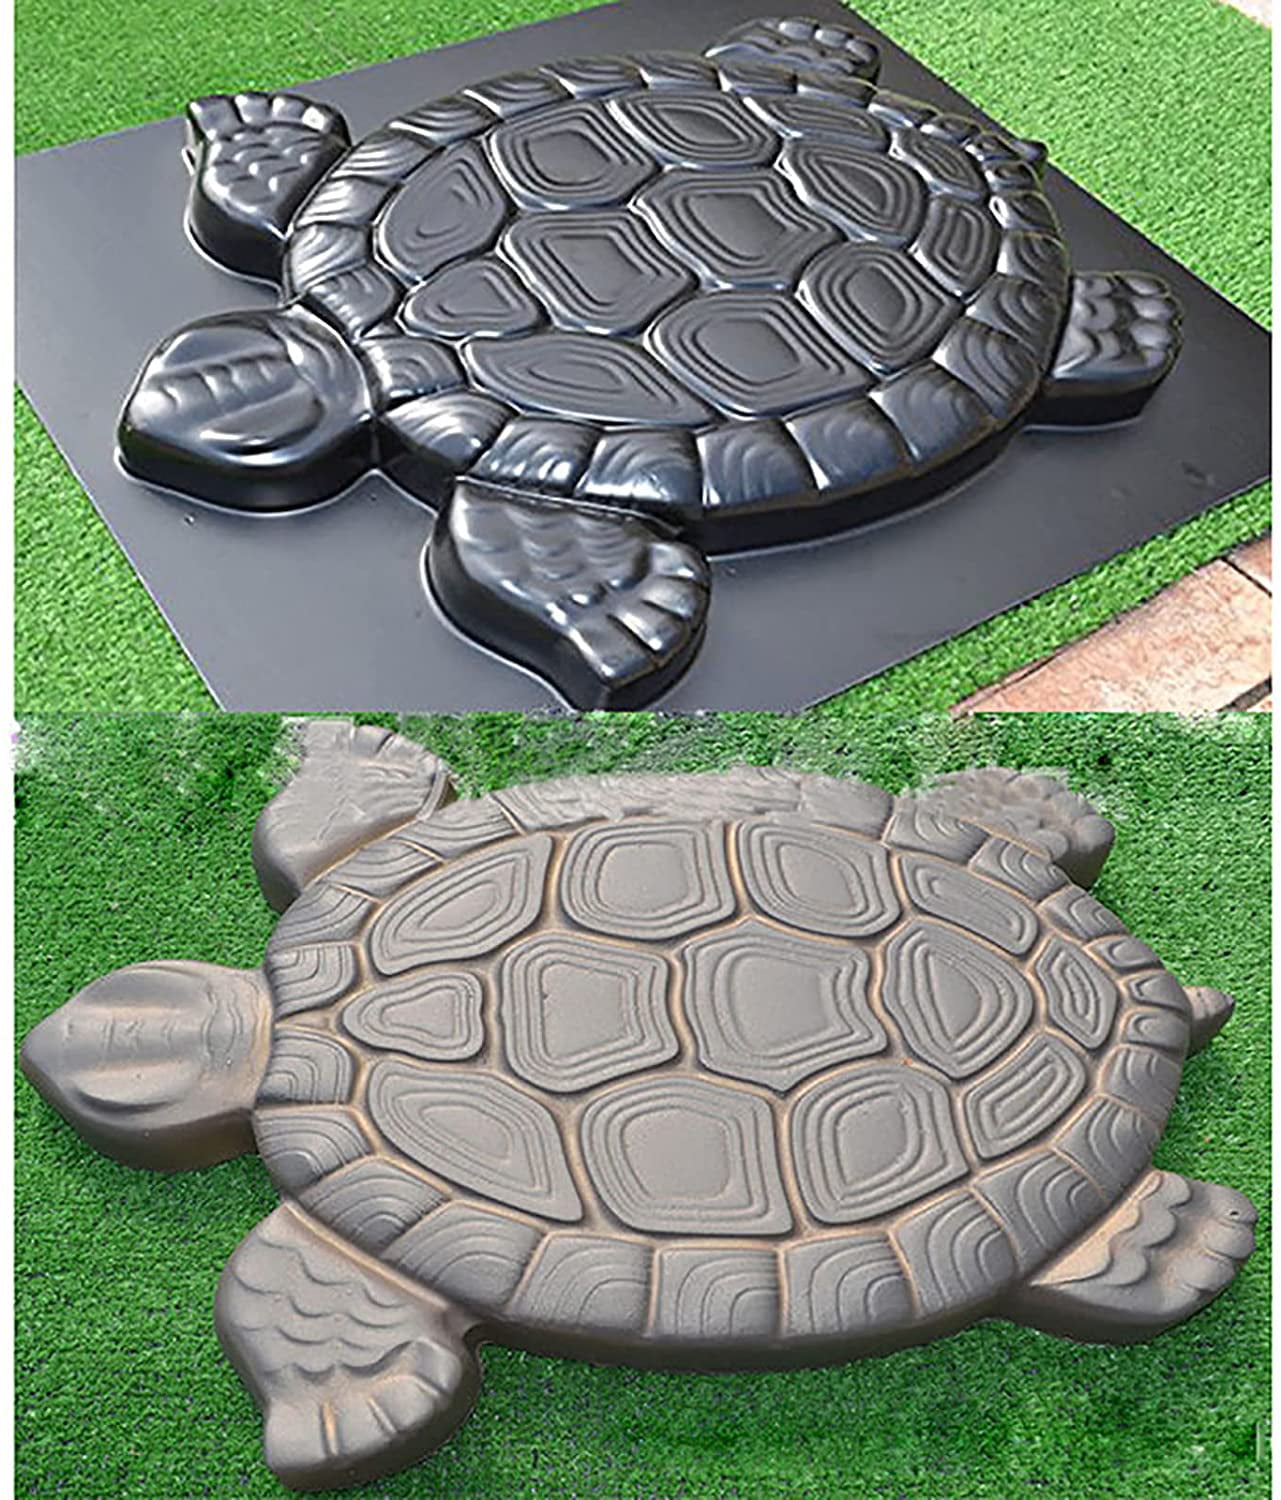 Turtle travertine tile mold  6" x 6" x 1/3" thick rapid set cement all mould 